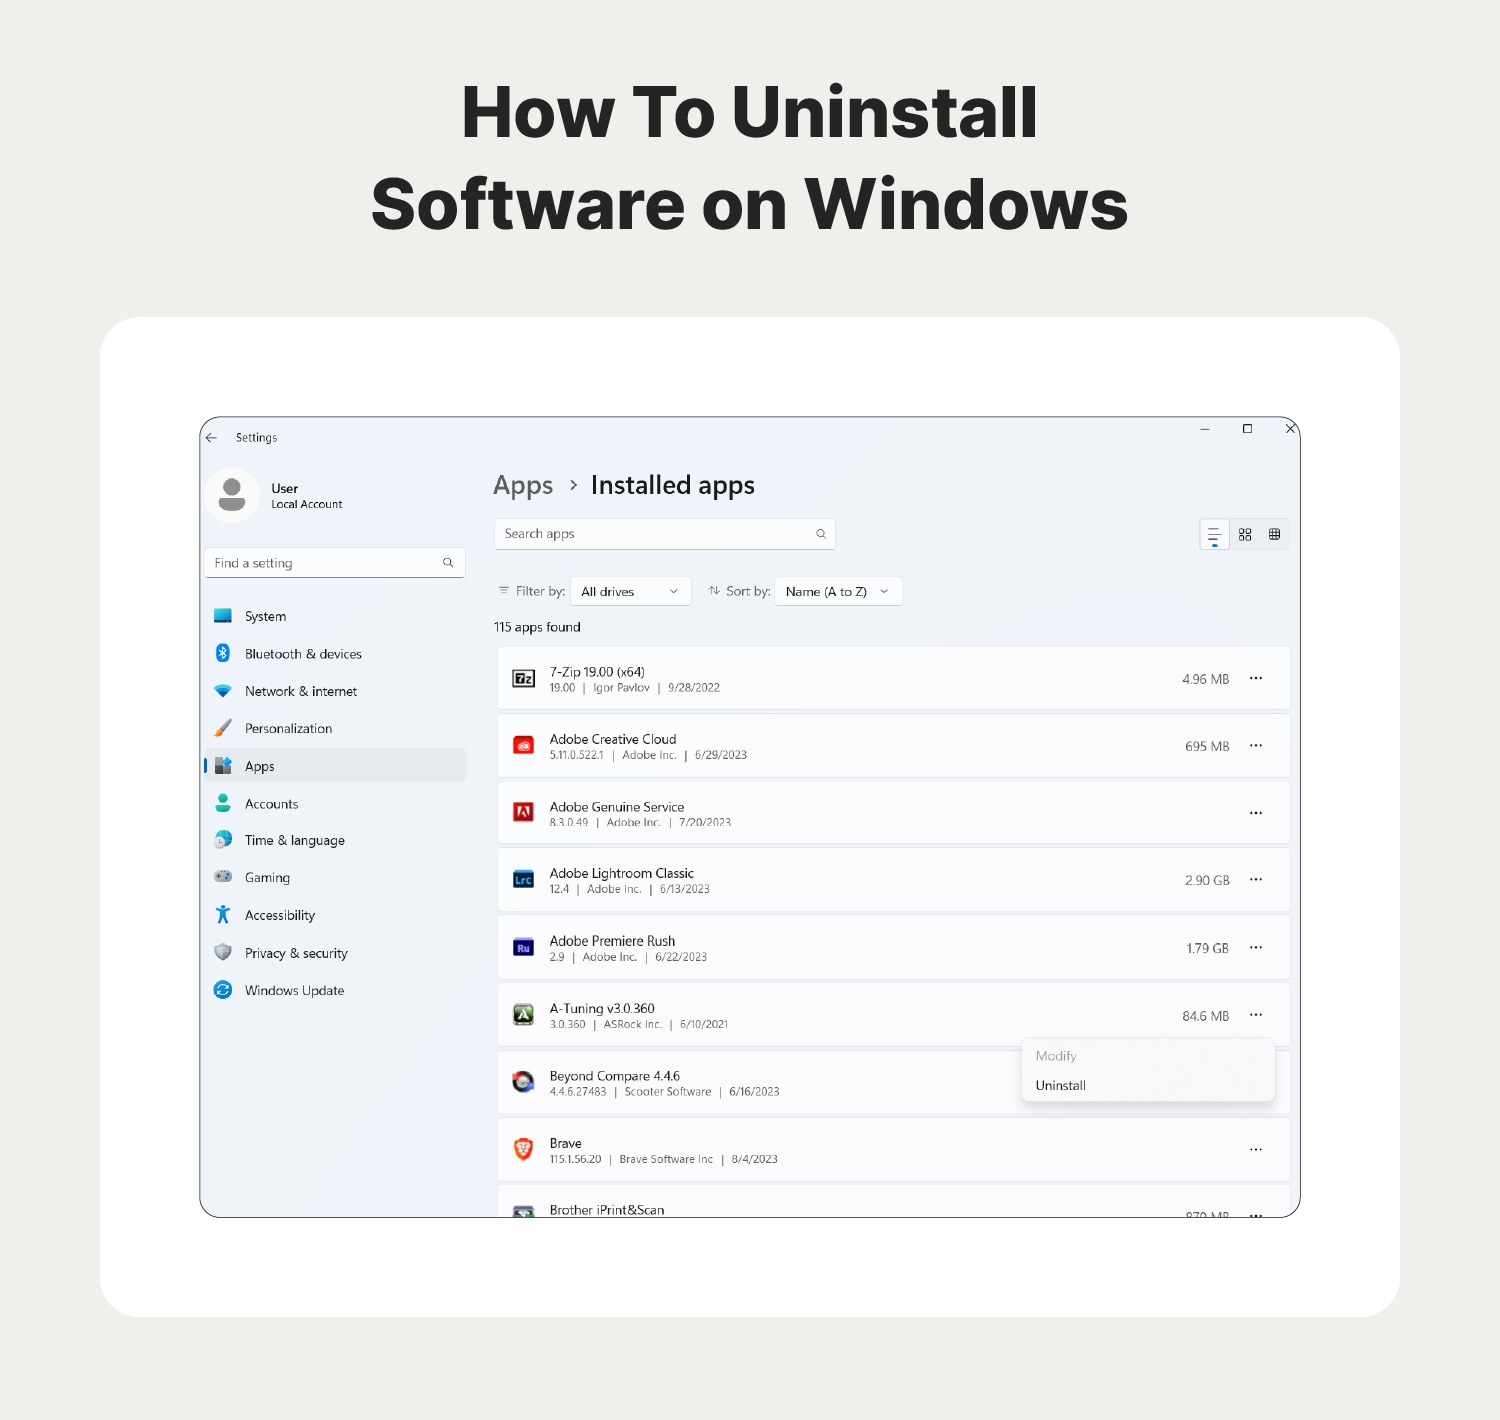 A graphic shows a screenshot to demonstrate how to uninstall software apps on a Windows computer.